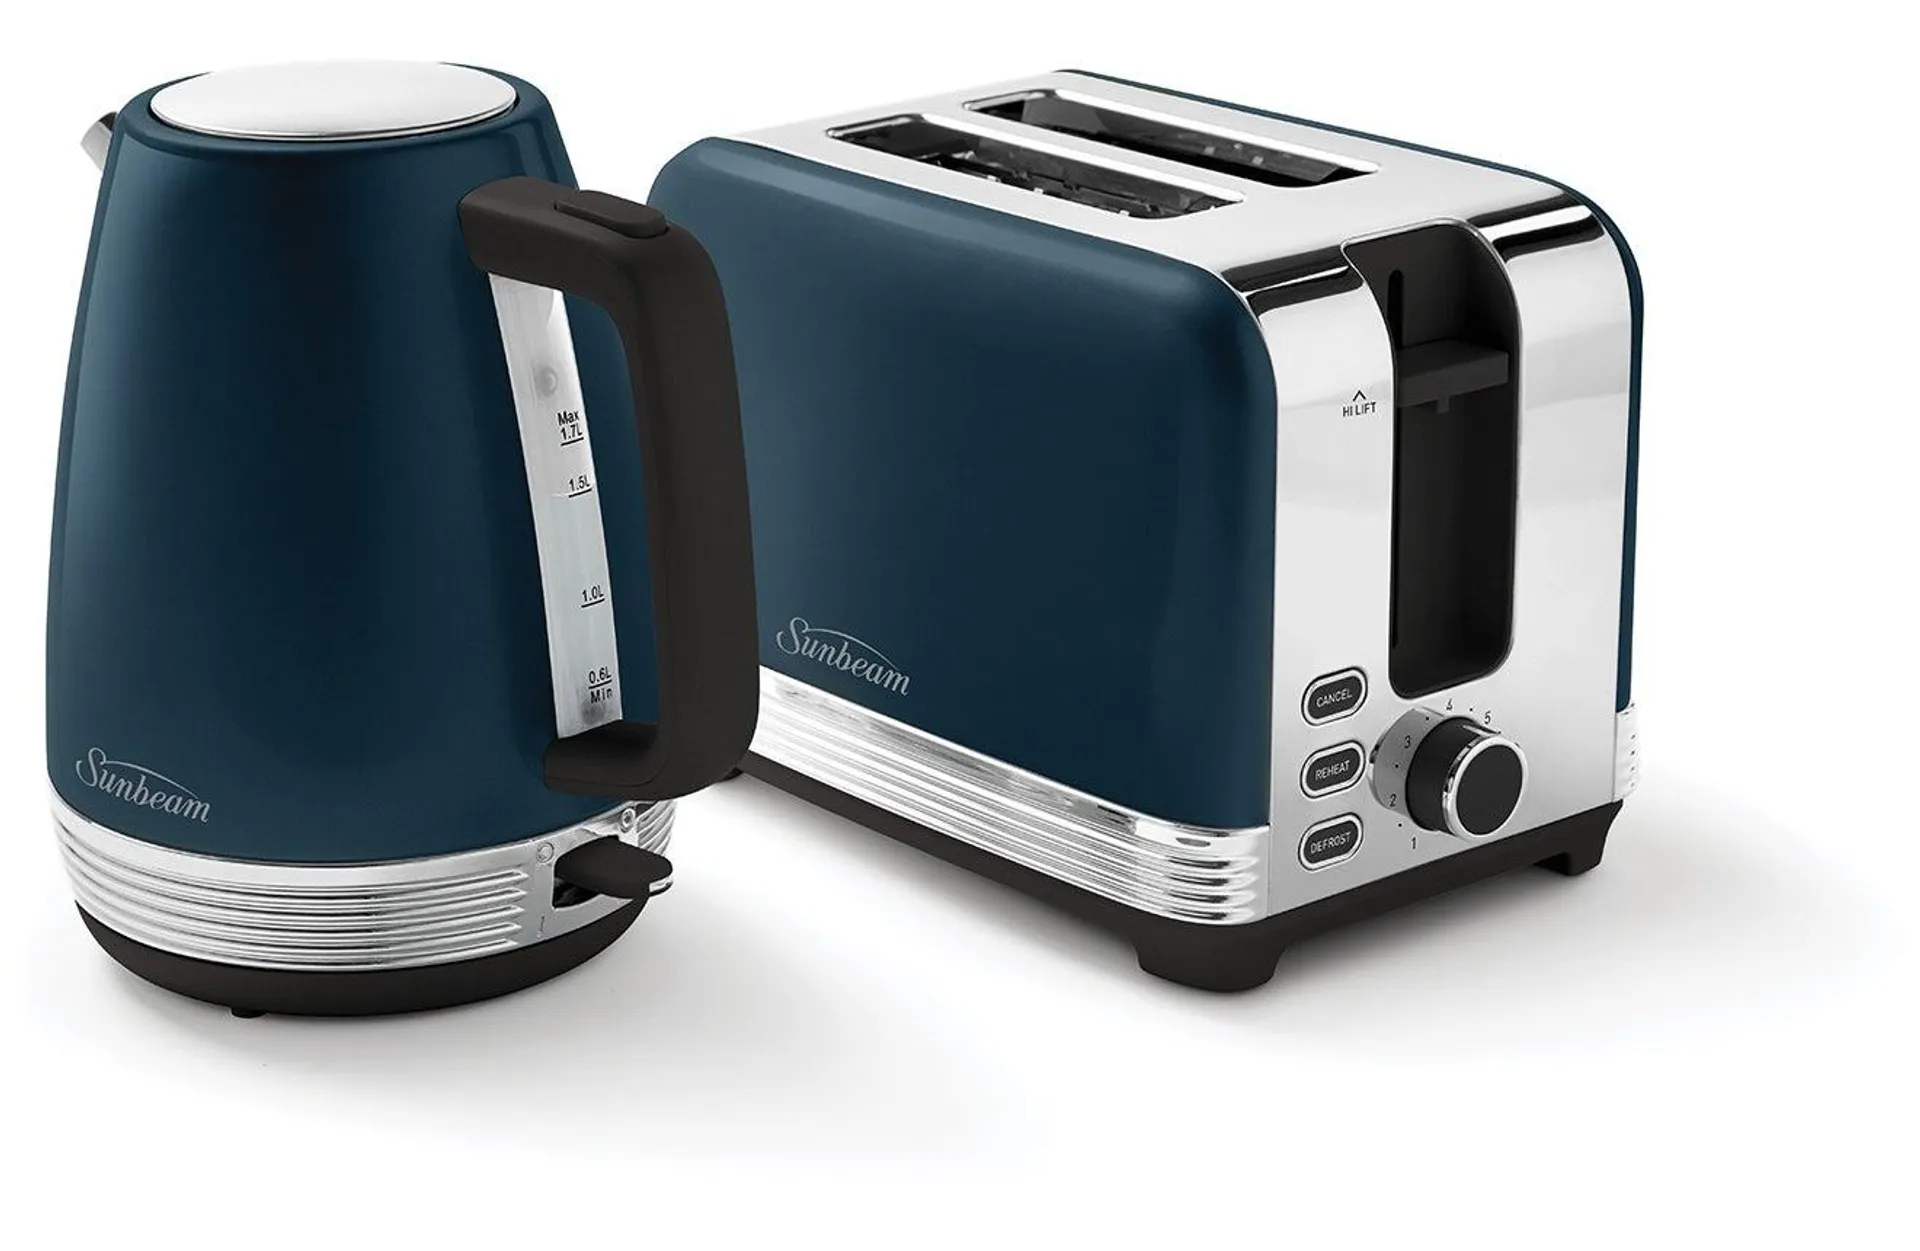 Sunbeam Chic Collection Kettle and Toaster Pack Up Set - Blue